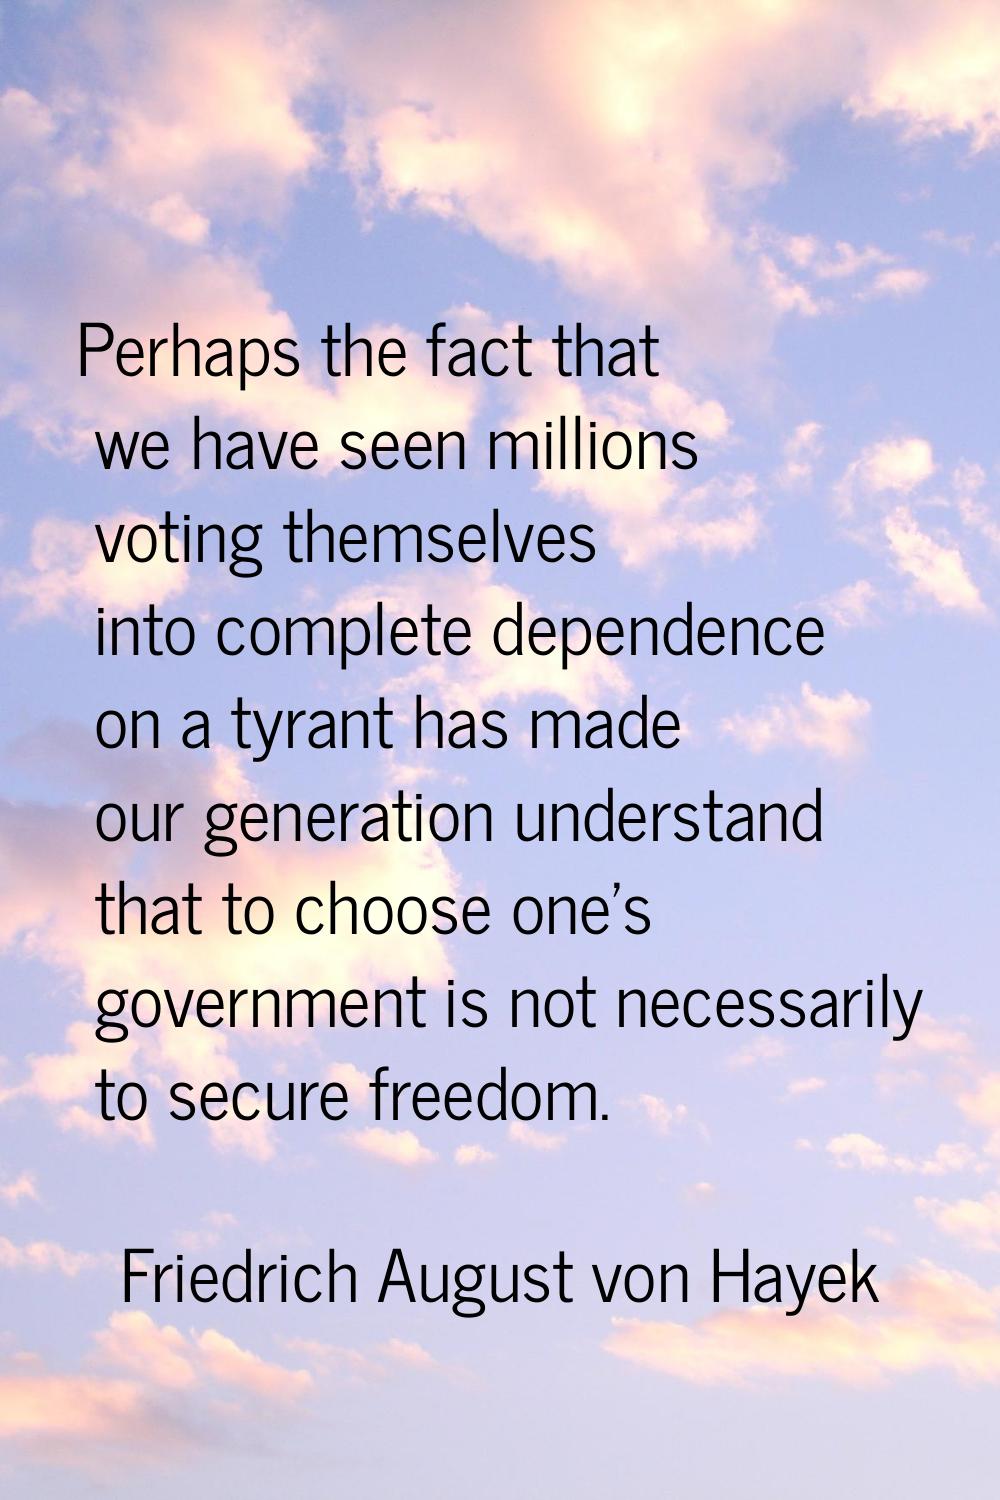 Perhaps the fact that we have seen millions voting themselves into complete dependence on a tyrant 